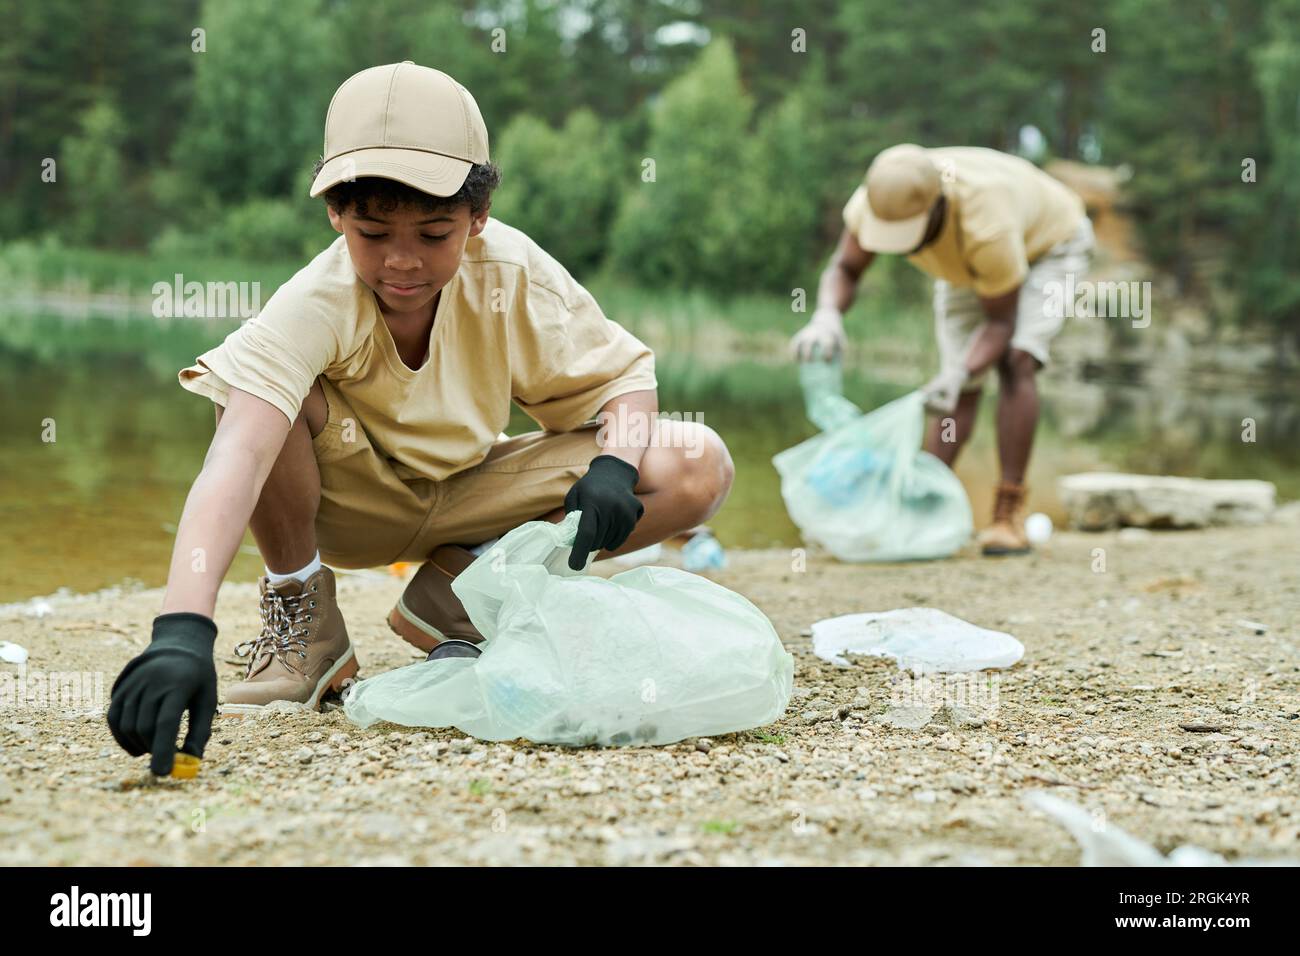 African American child cleaning territory around the lake together with his dad in background Stock Photo